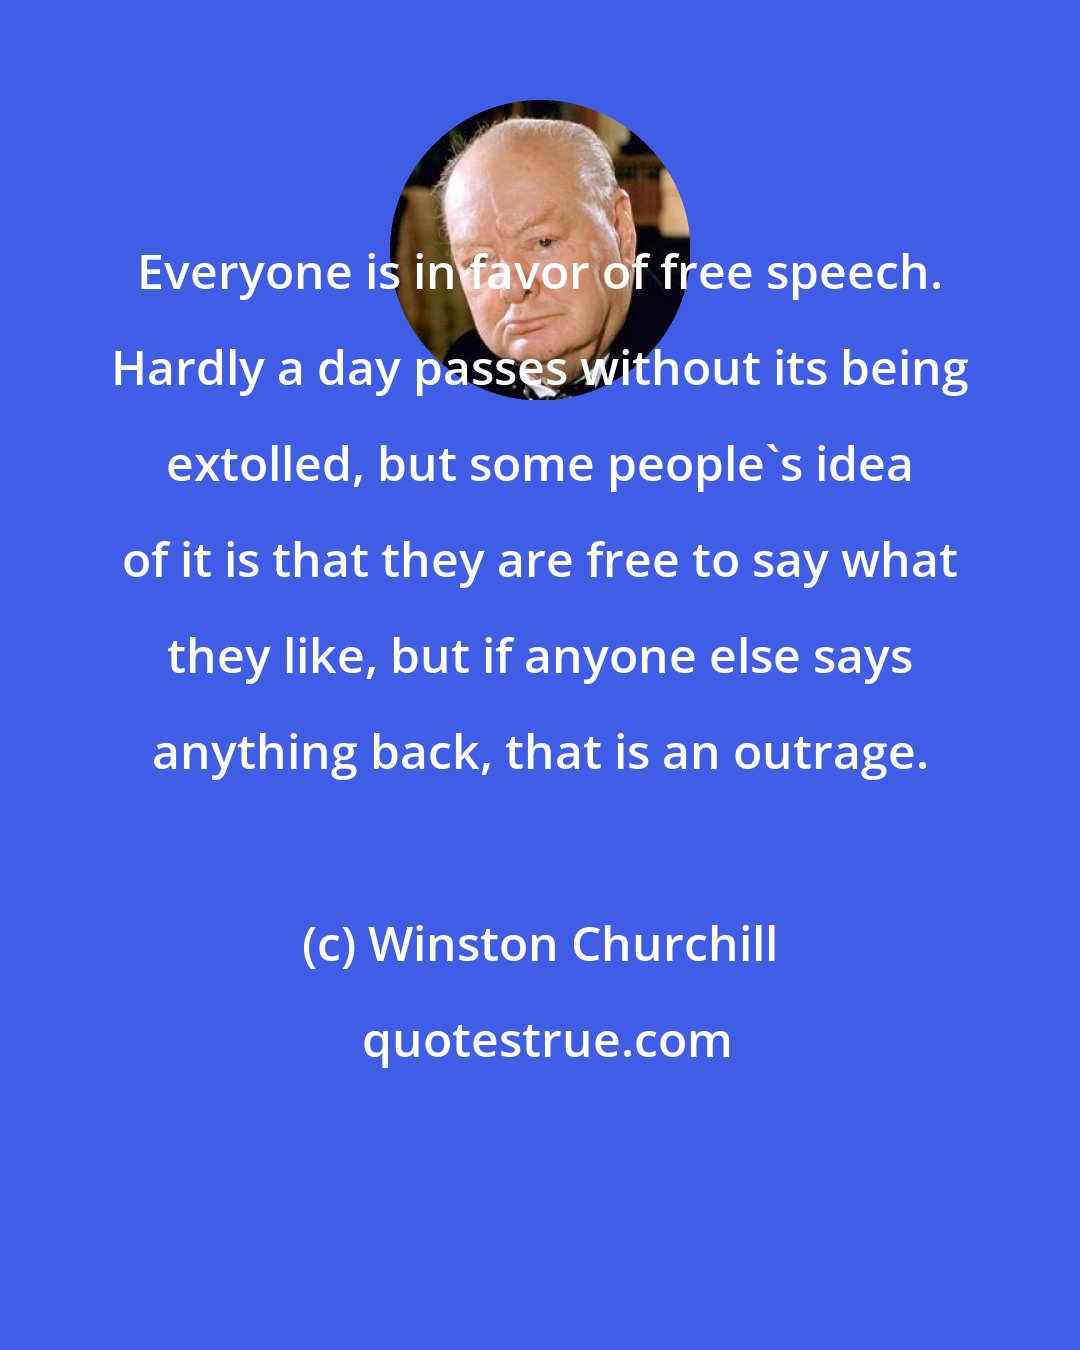 Winston Churchill: Everyone is in favor of free speech. Hardly a day passes without its being extolled, but some people's idea of it is that they are free to say what they like, but if anyone else says anything back, that is an outrage.